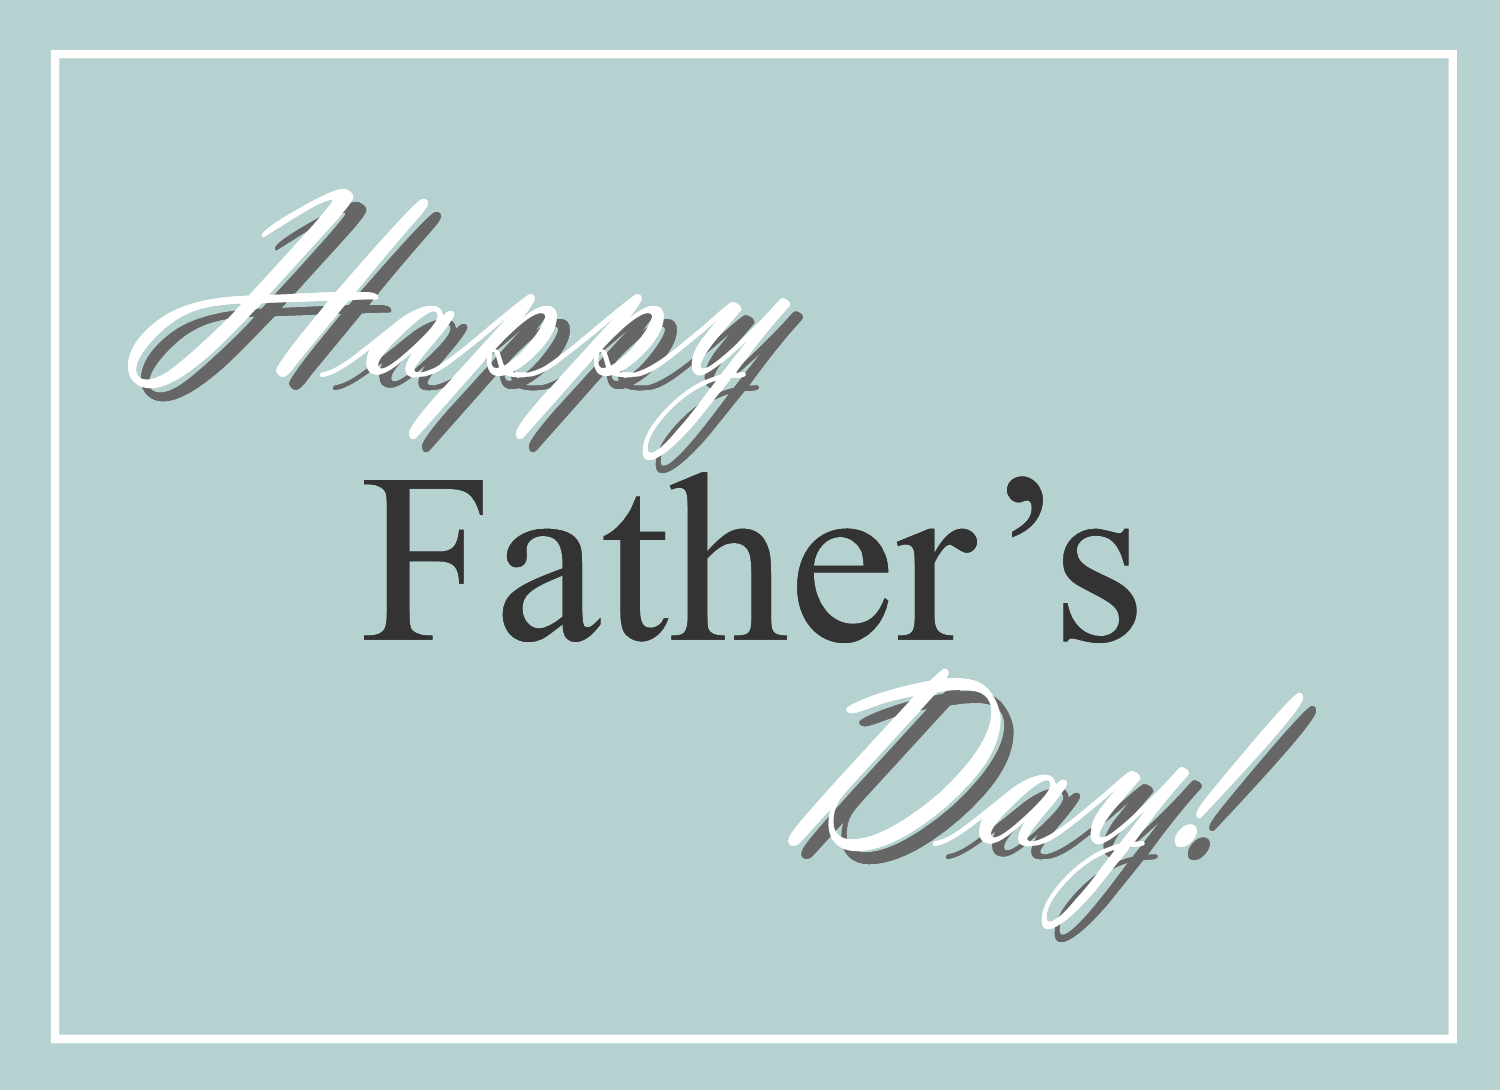 Free Clipart N Images: Happy Father's Day Clip Art Greeting.